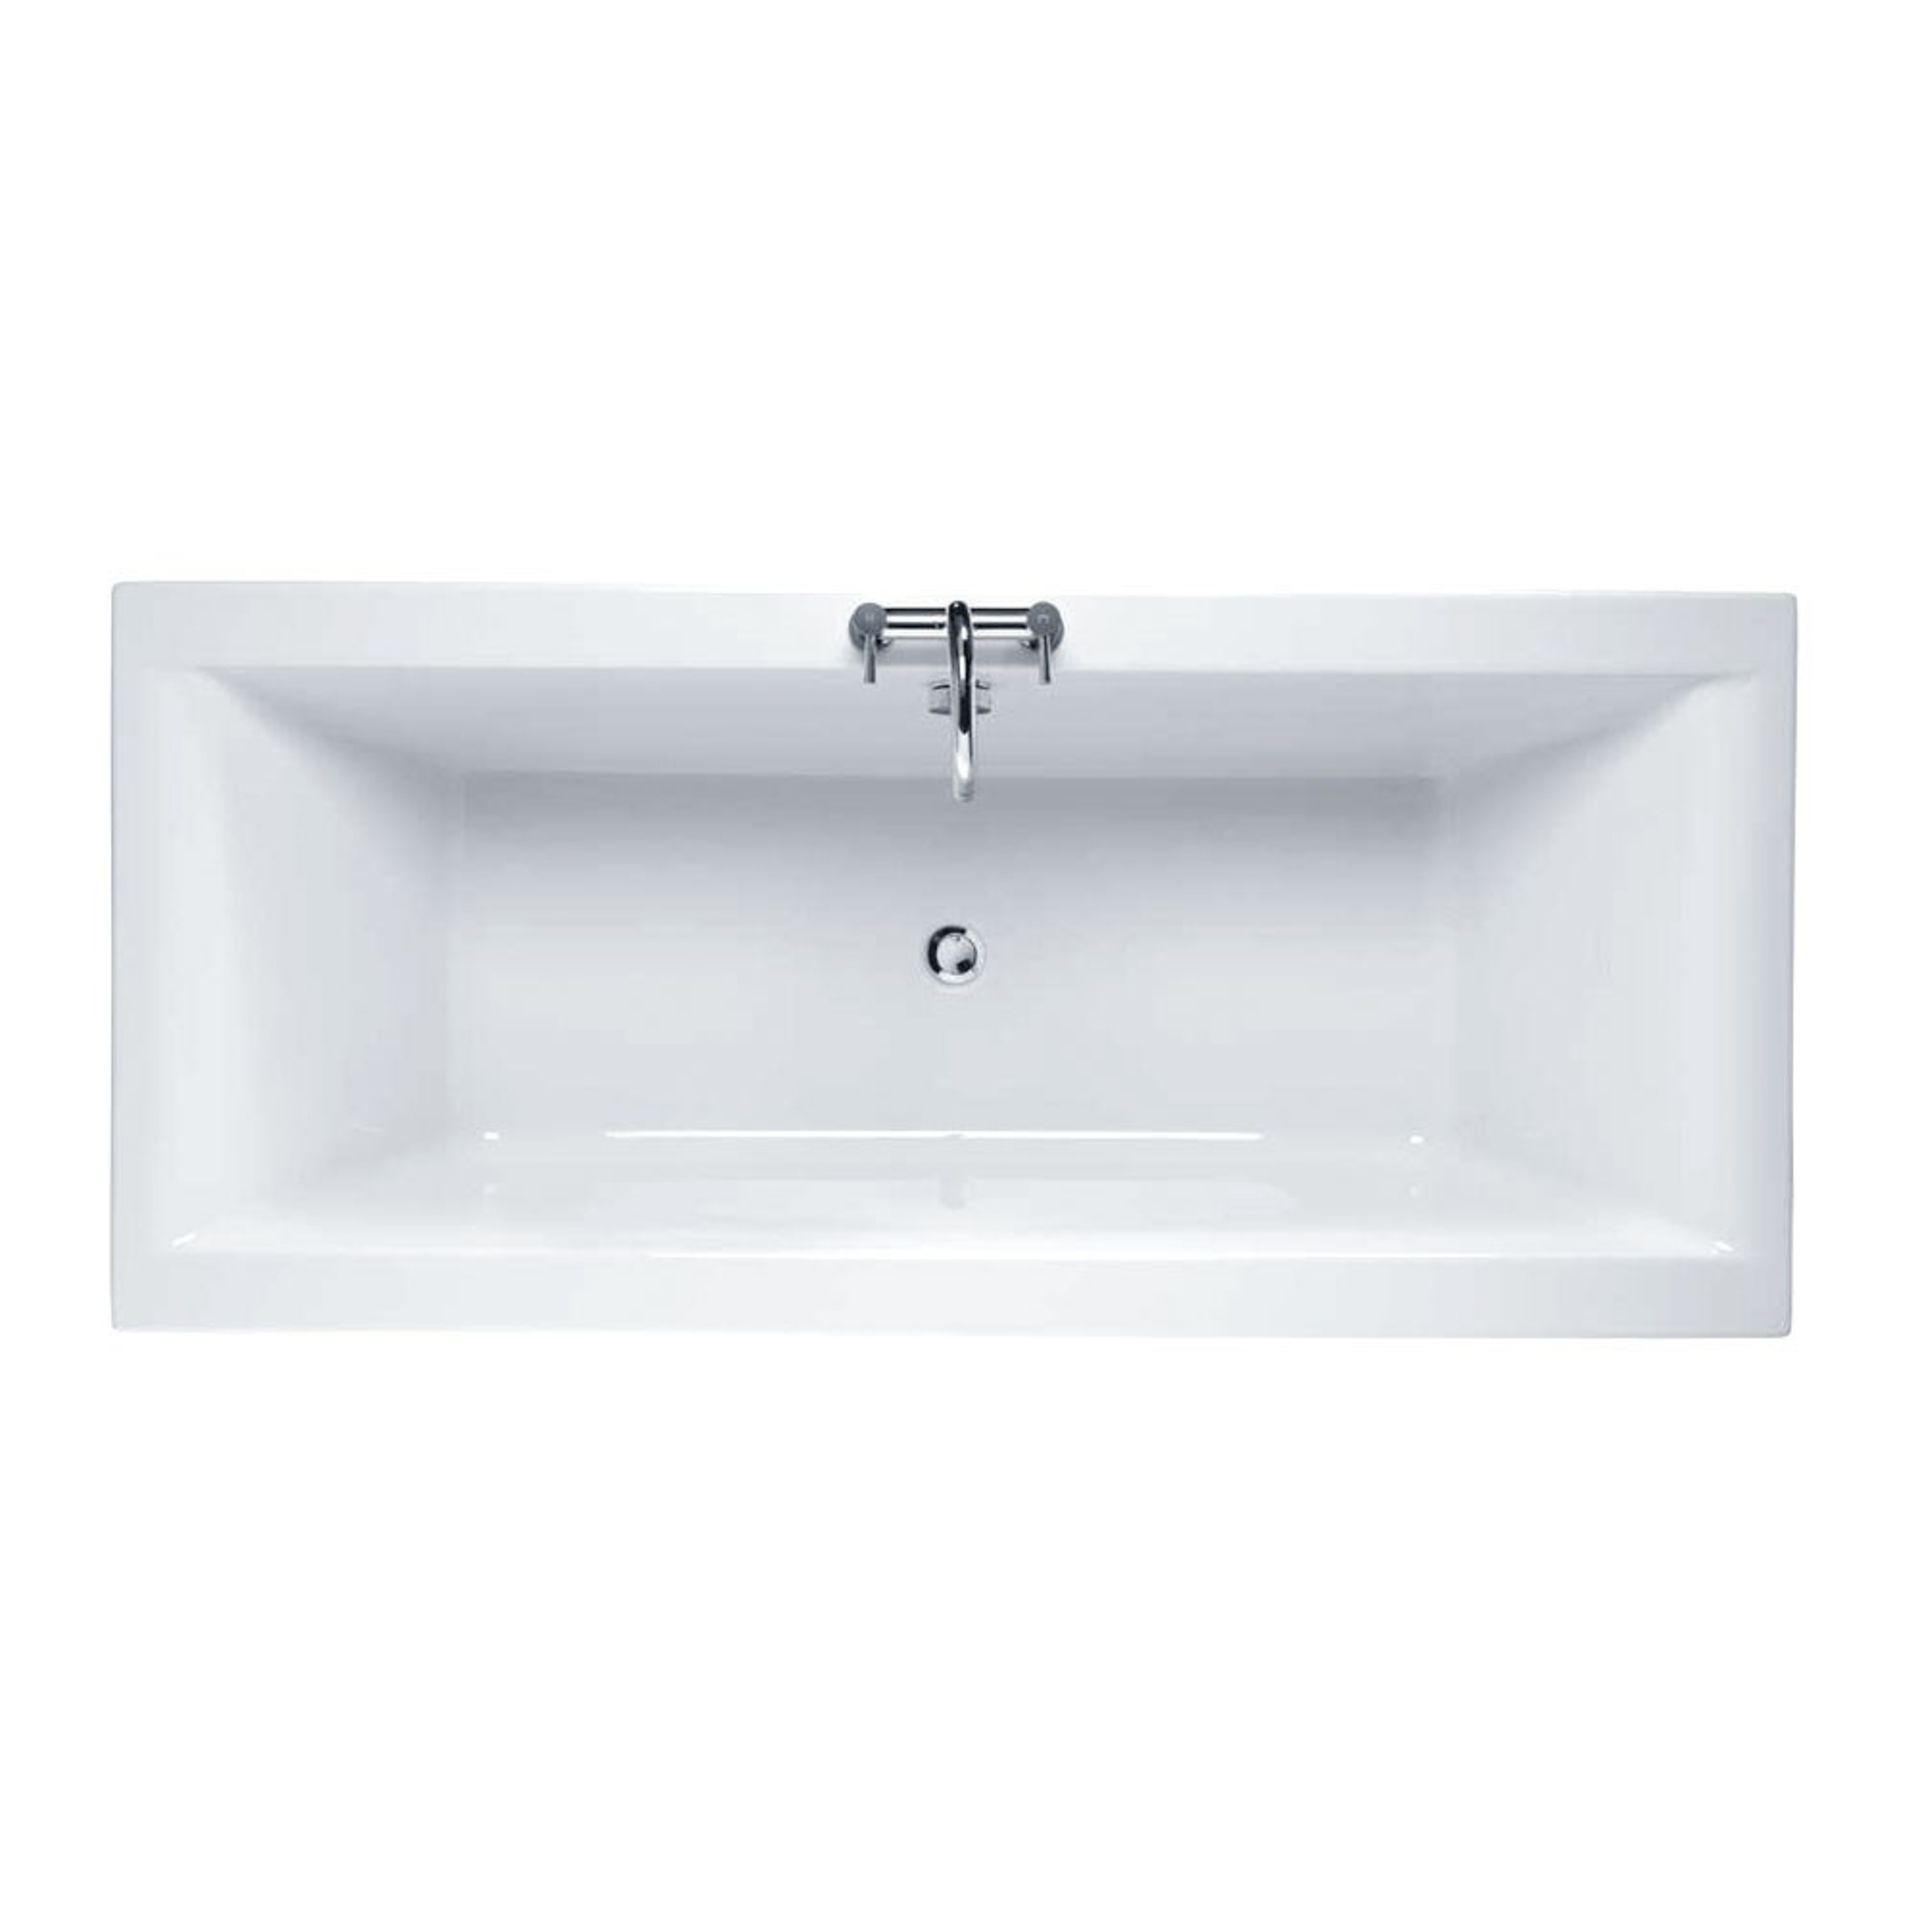 Twyford INDULGENCE 1700x750mm Rectangular Bath. White. RRP £928.99.Comes complete with side p... - Image 2 of 2